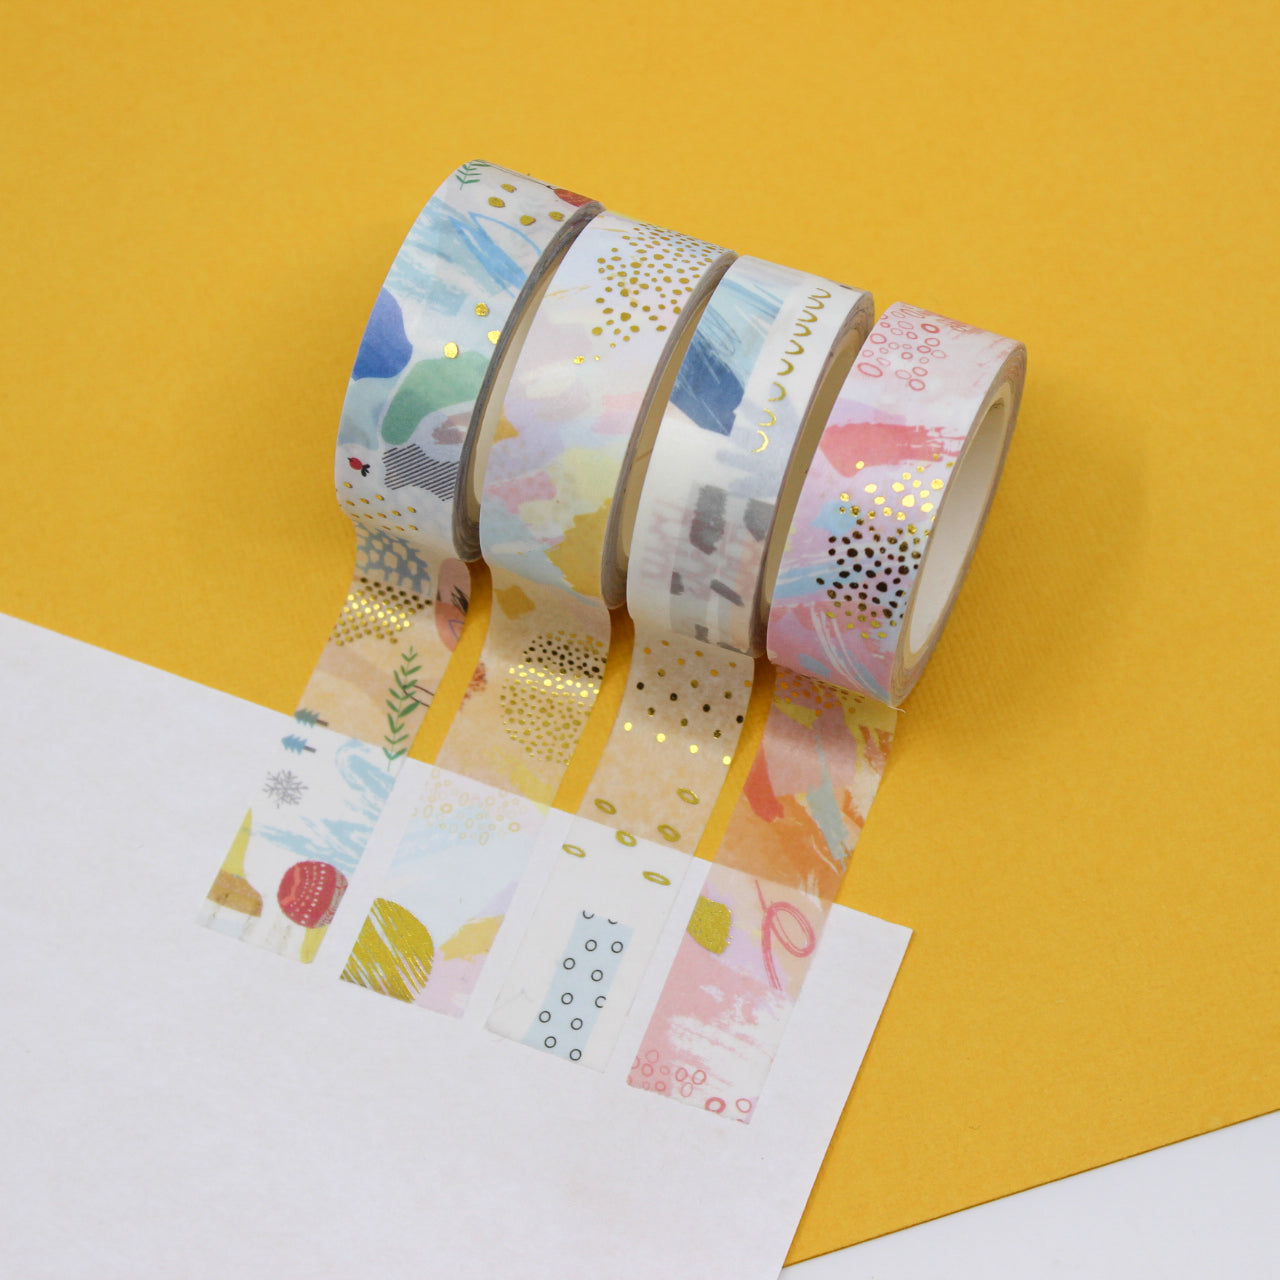 This tape is a unique and pretty decorative pattern that is reminiscent of a retro 80's pattern and will add some sparkle to any craft project, BUJO, or planner spread. We offer four different patterns in this style in our shop. This tape is sold at BBB Supplies Craft Shop.